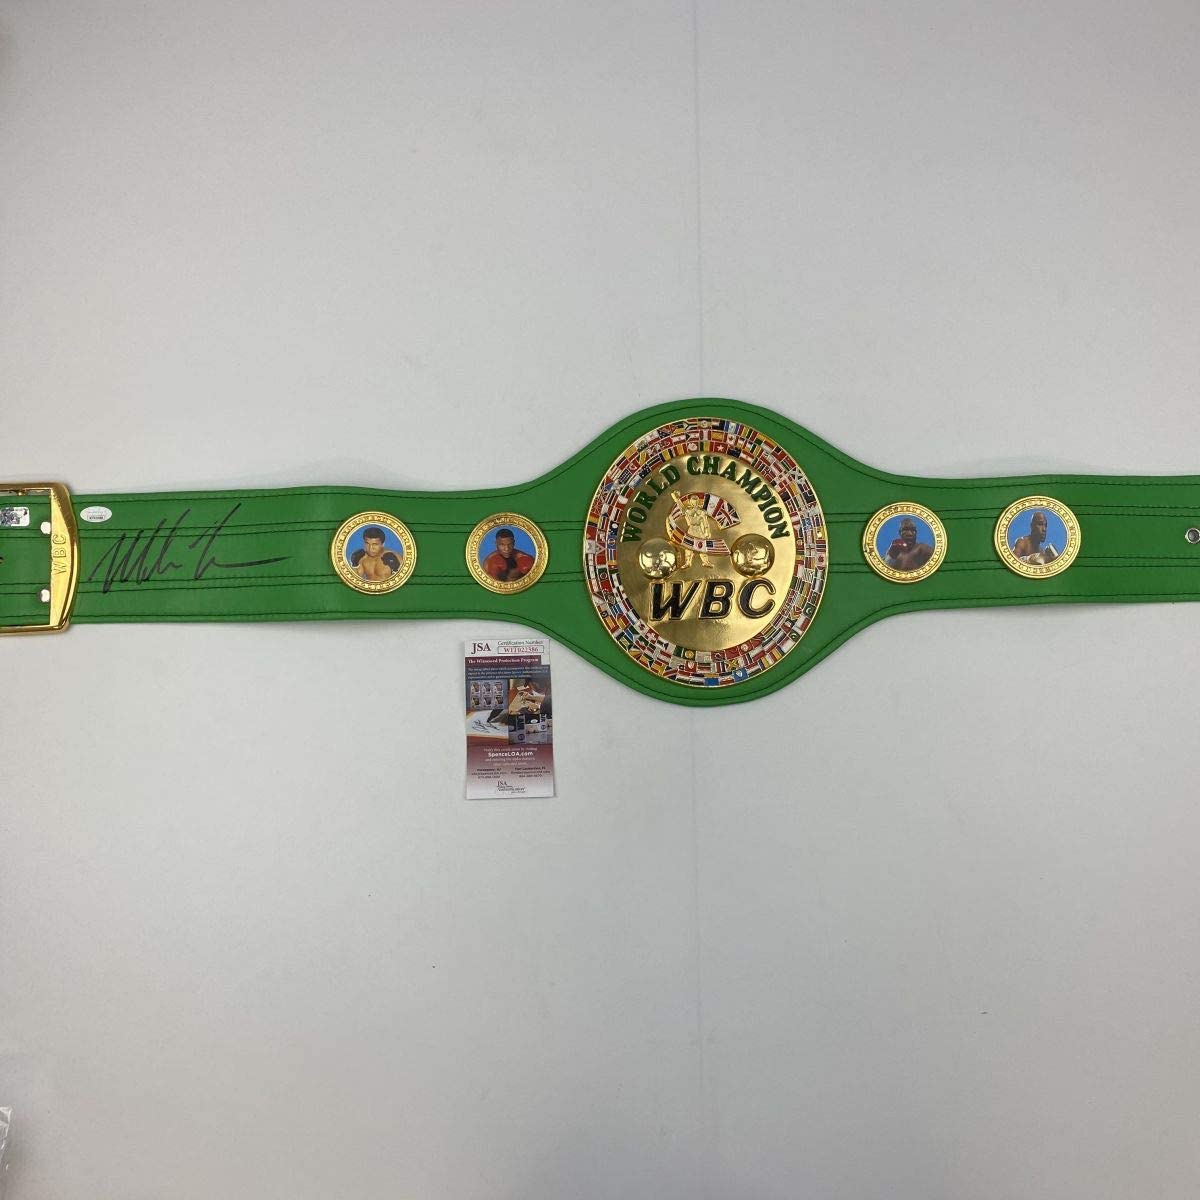 Autographed/Signed Mike Tyson WBC Green Boxing Replica Champions